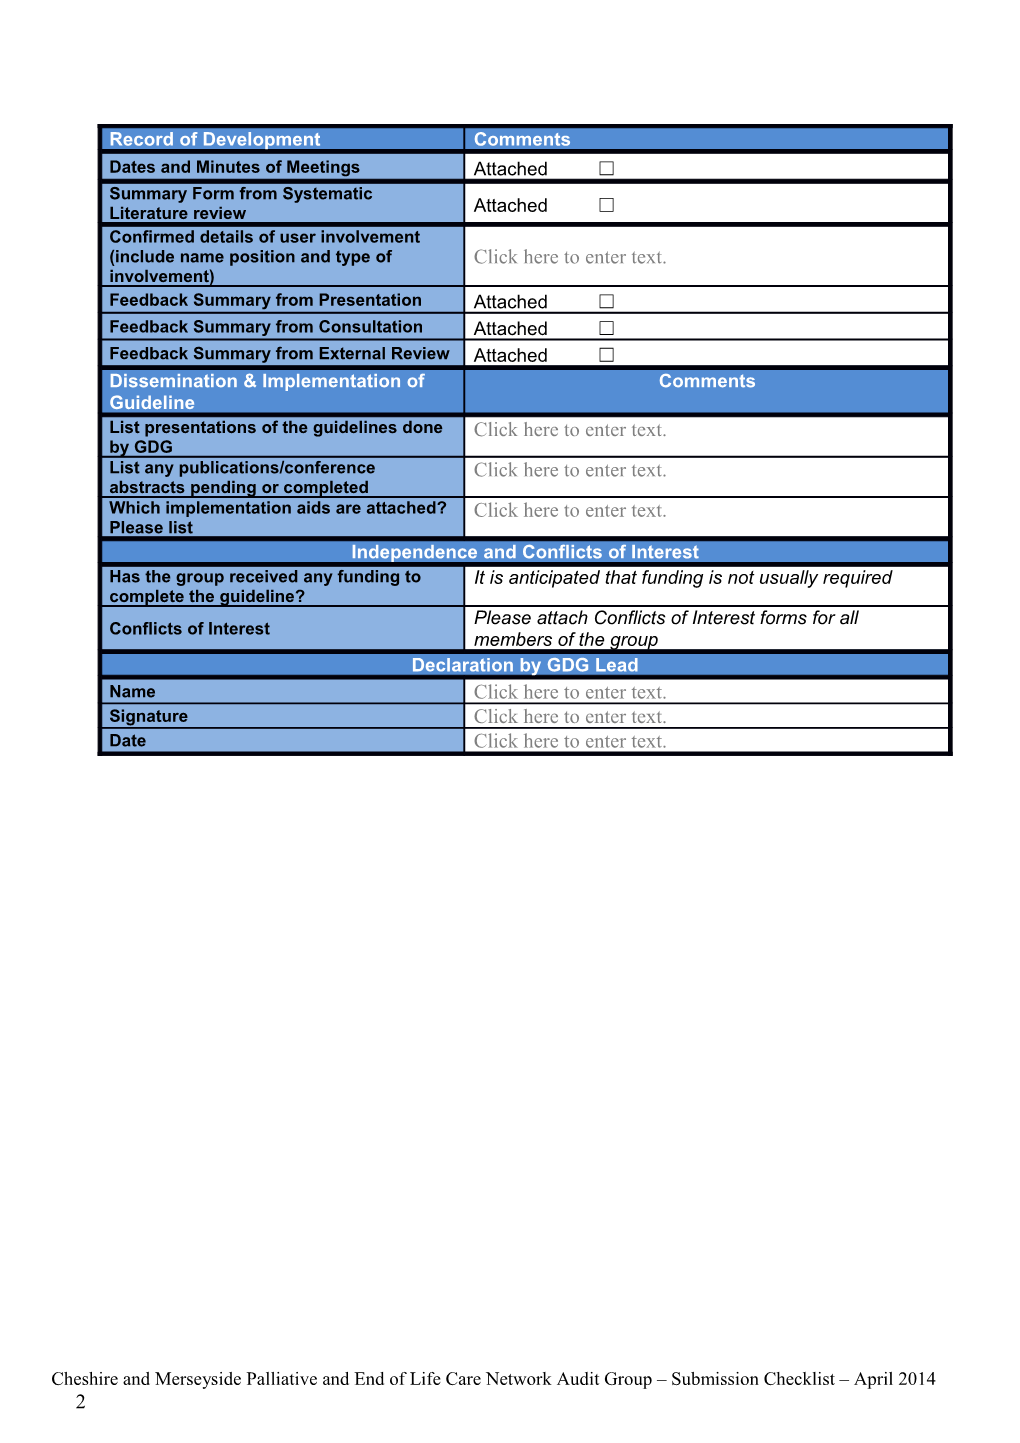 Submission Checklist for Completed Guidelines